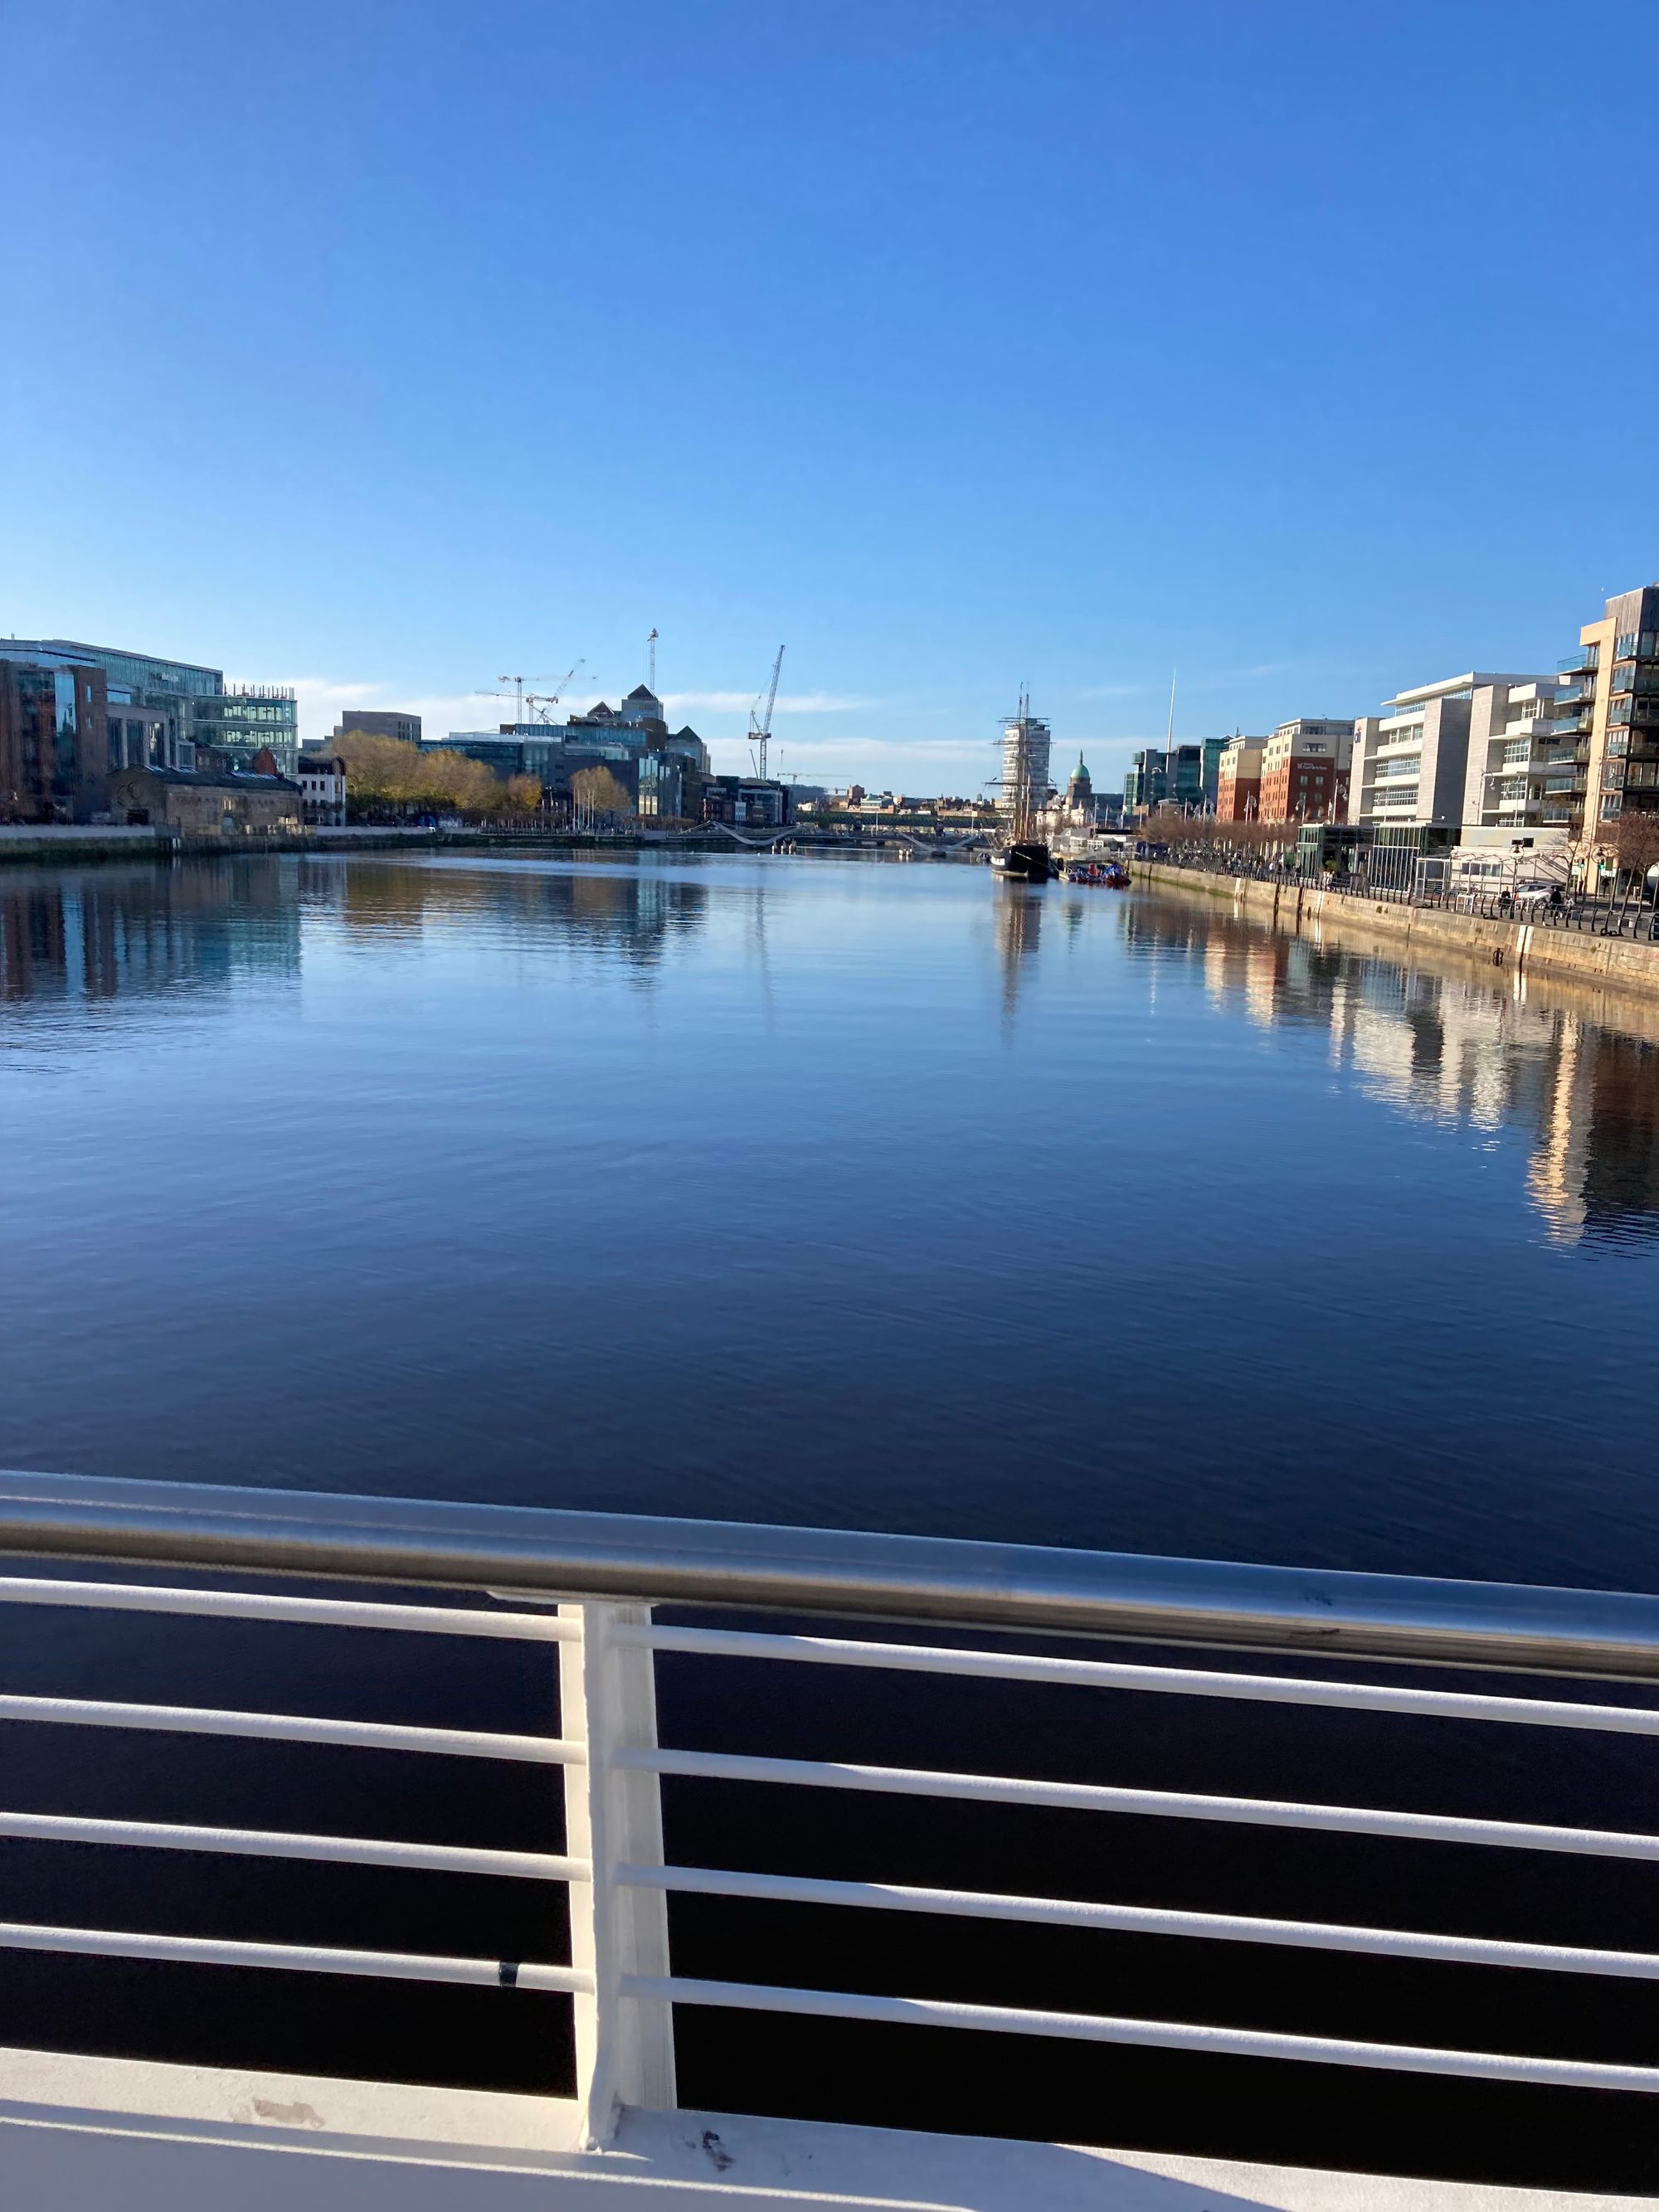 An image of the River Liffey on sunny day. You can see buildings on the side and a railing before the river starts.